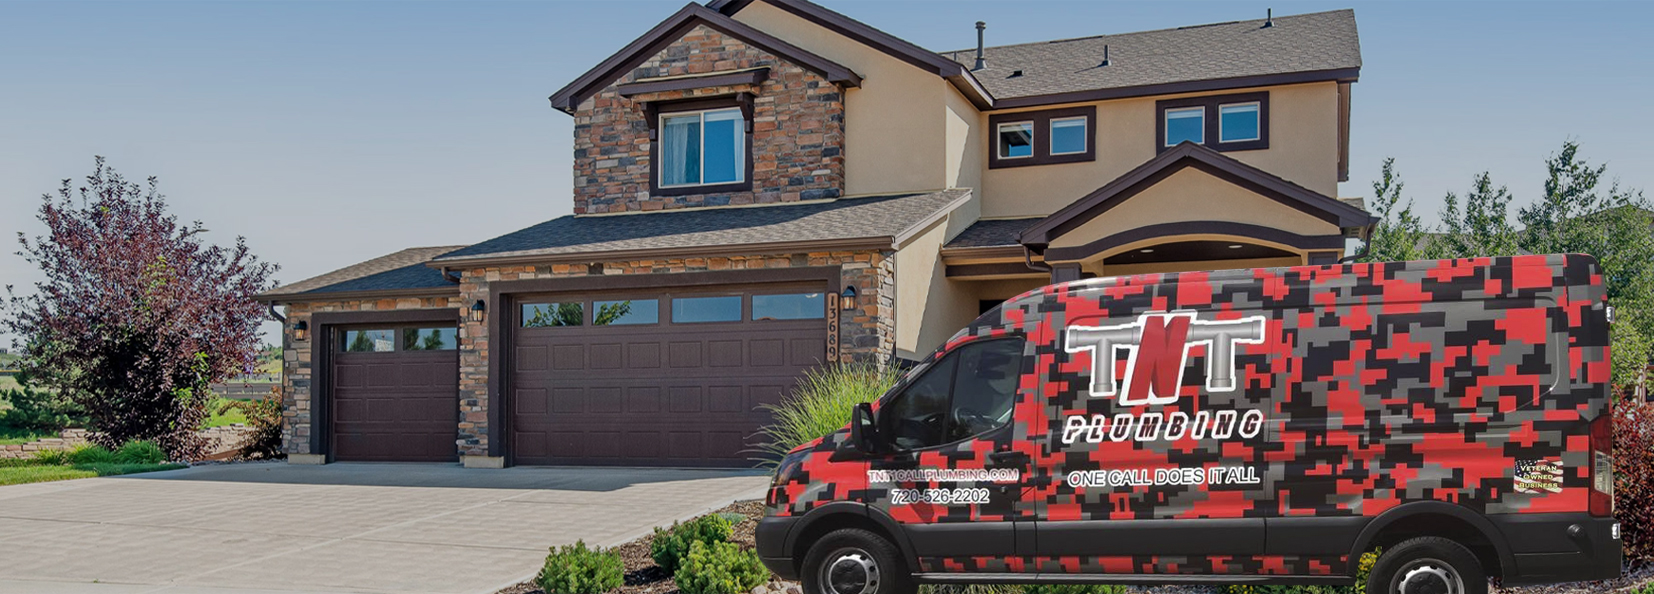 tnt home services banner